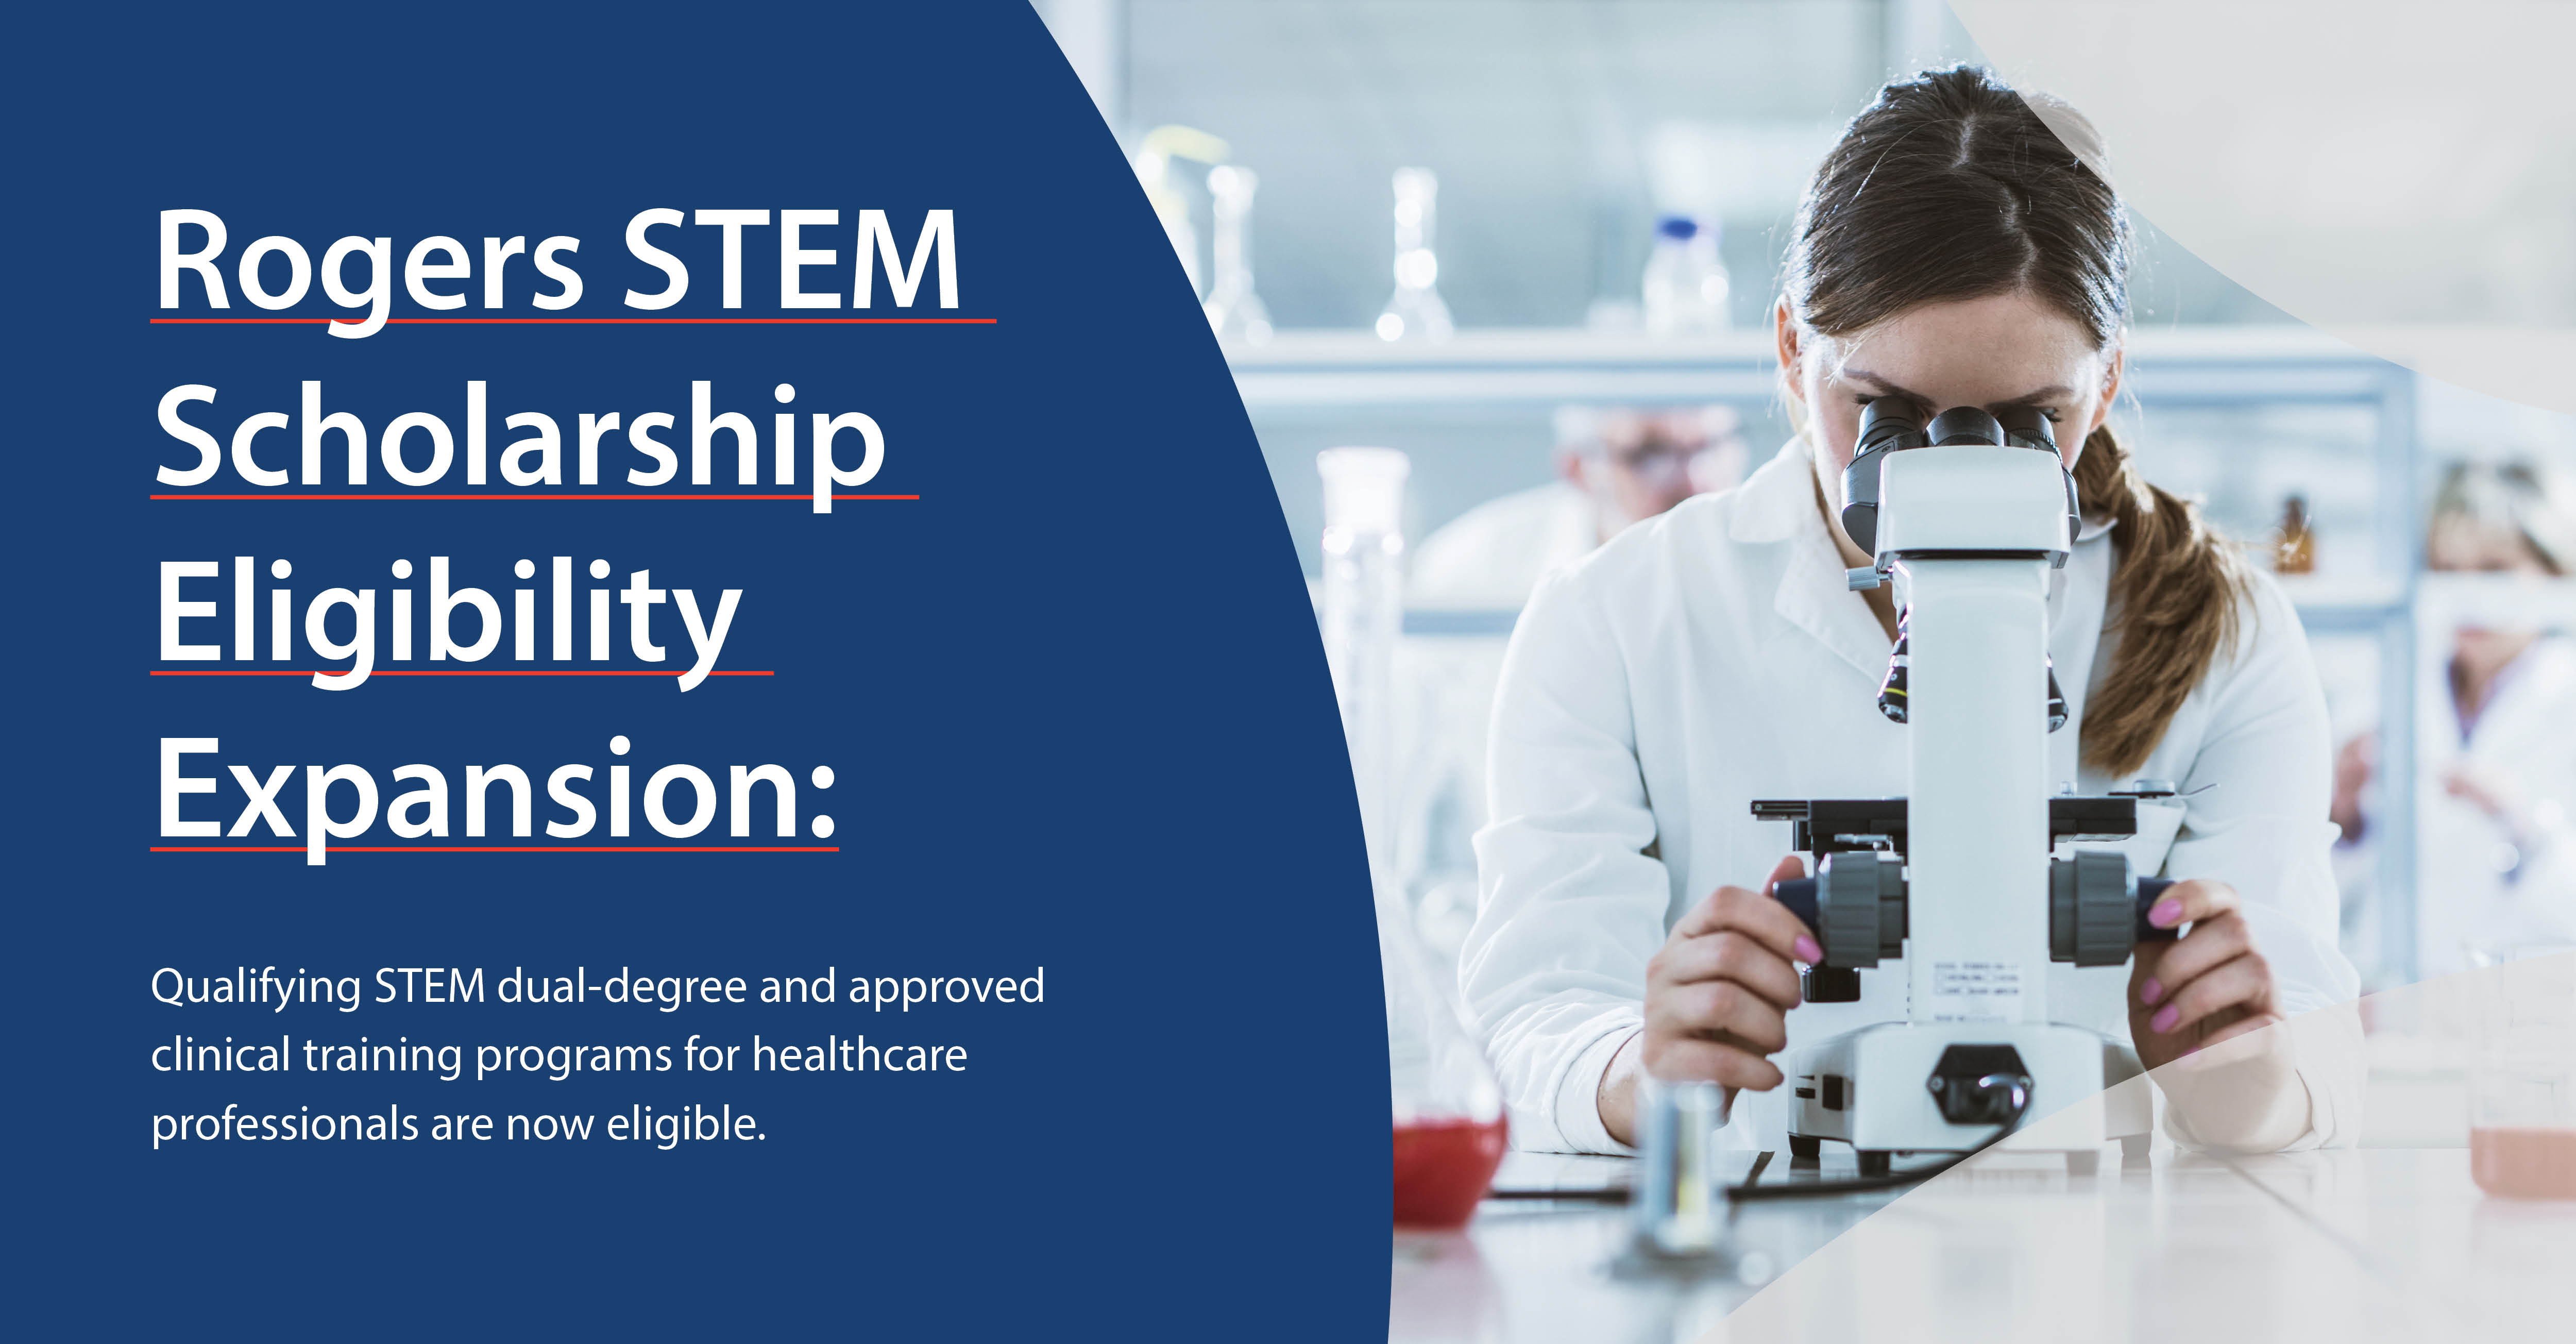 Image - STEM student in lab. Content - Rogers STEM Scholarship Eligibility Expansion: Qualifying STEM dual-degree and approved clinical training programs for healthcare professionals are now eligible.